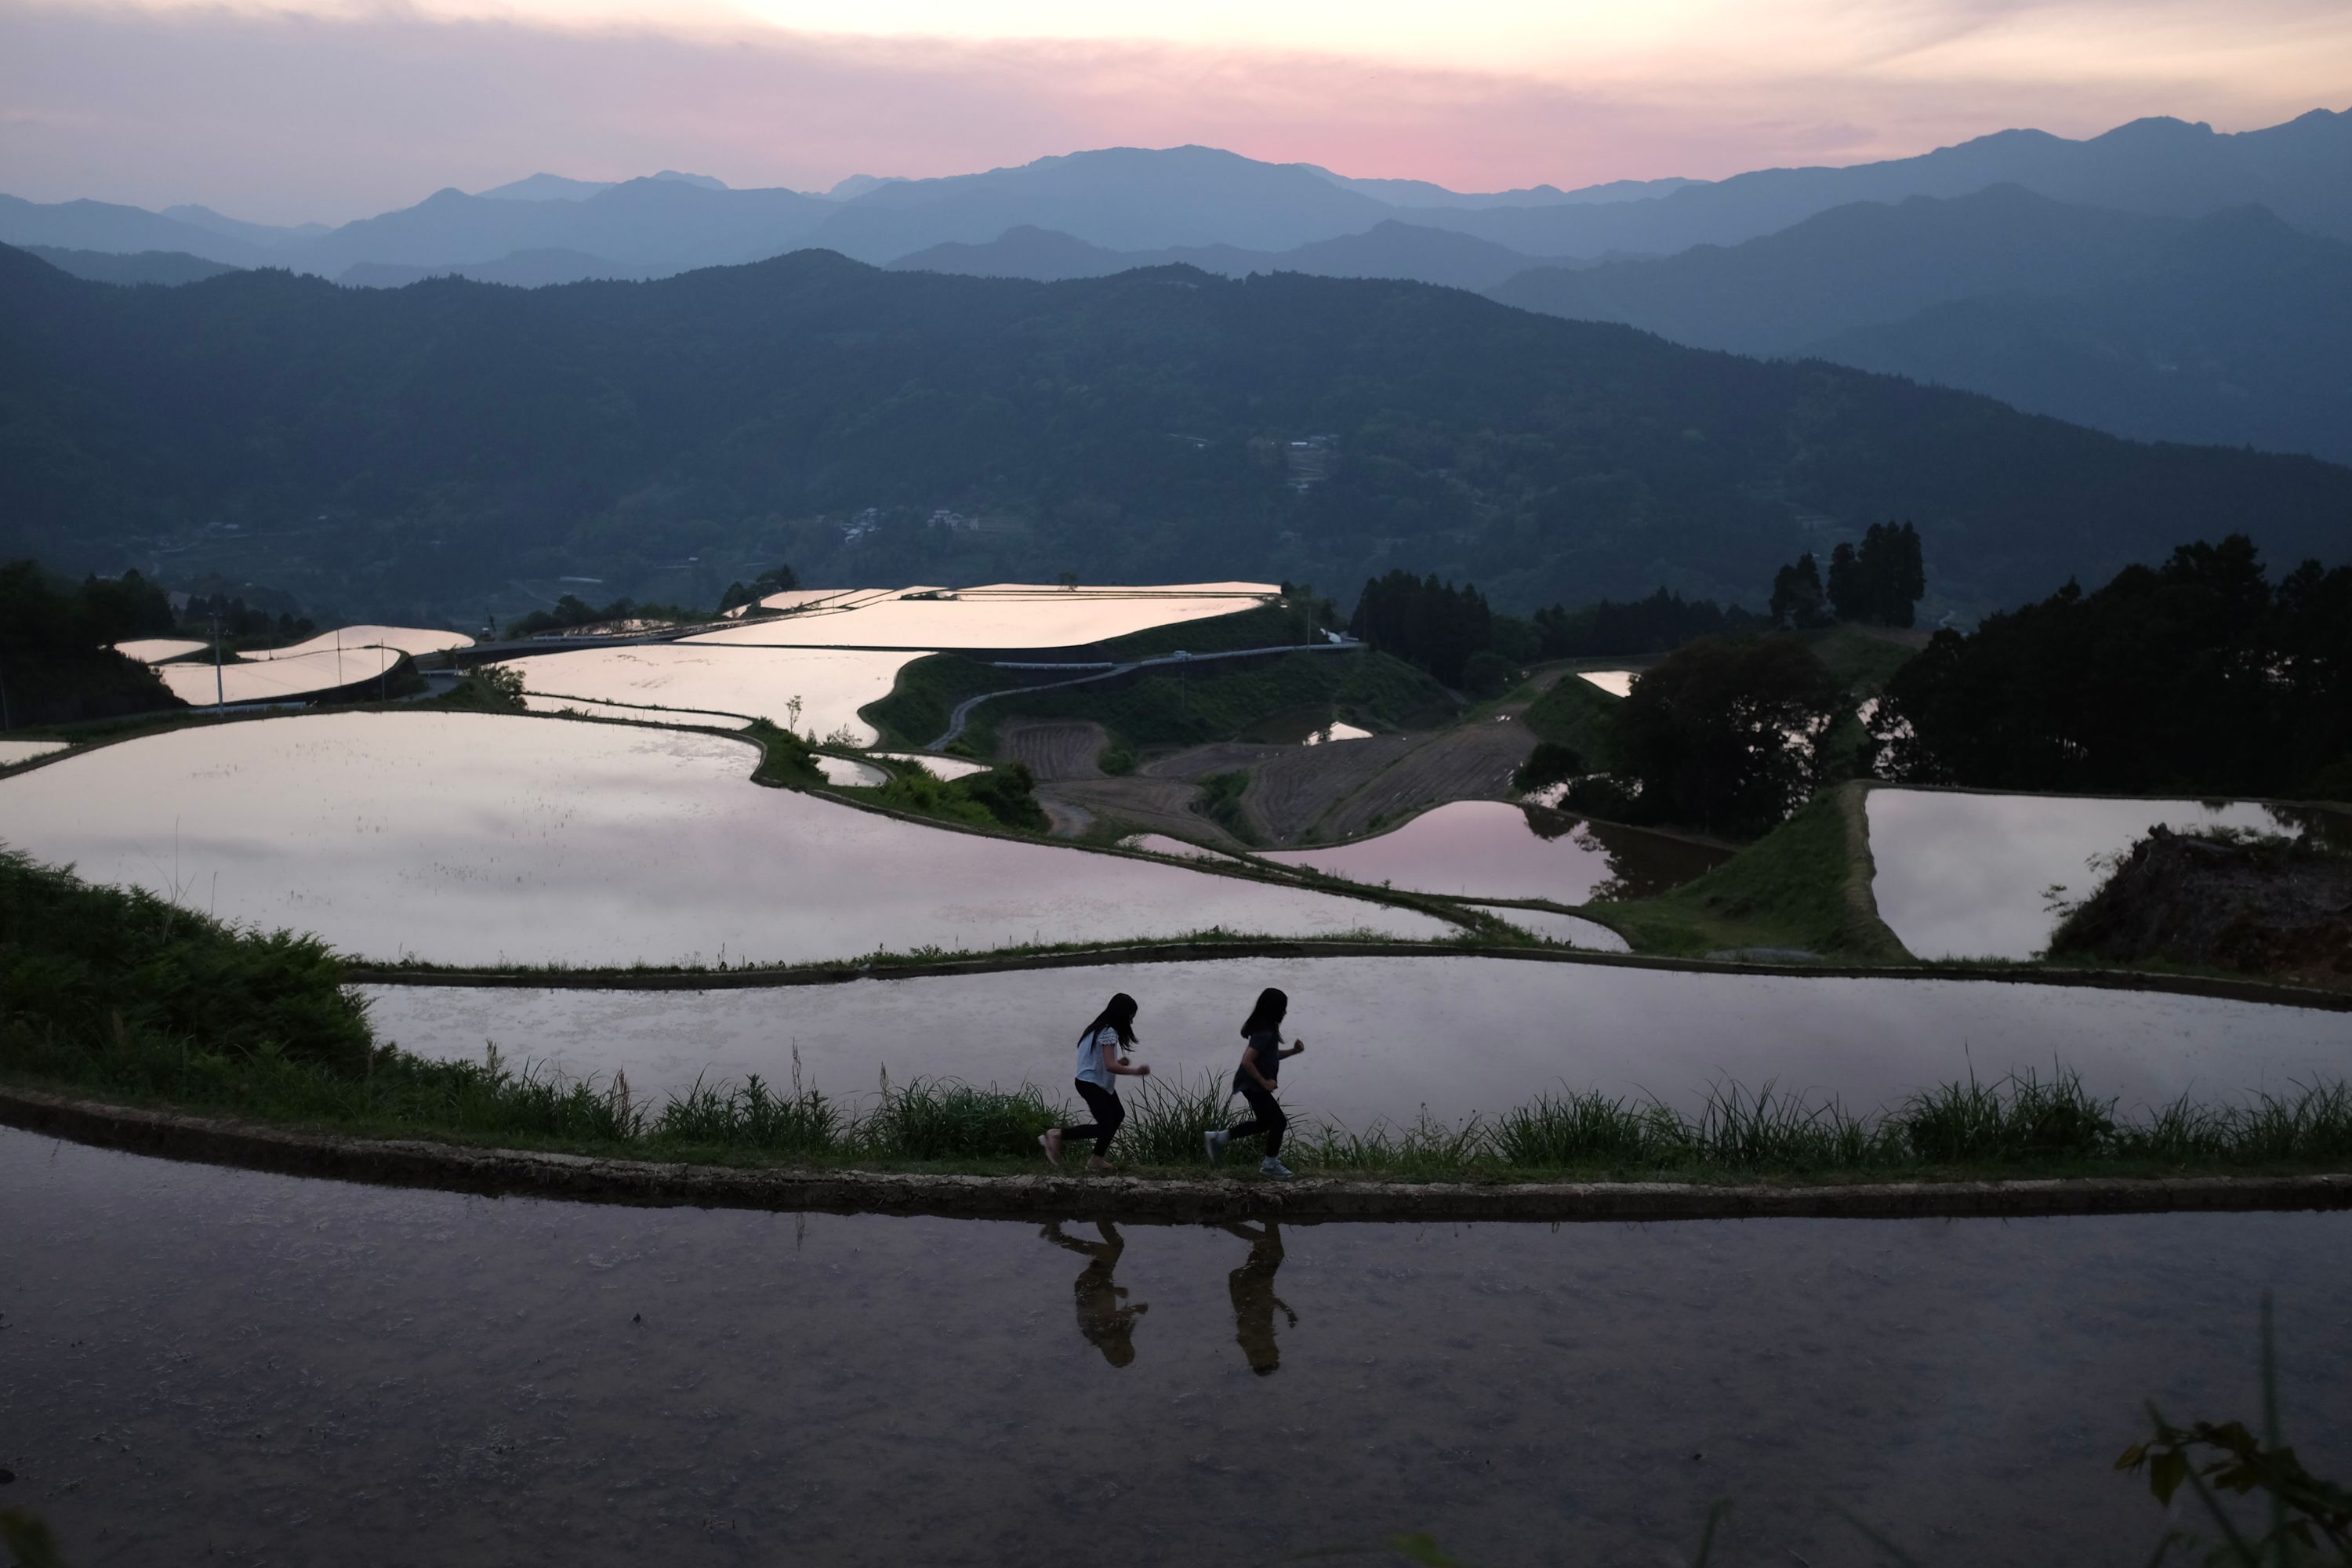 Two young girls run along the dyke between two flooded ricefields, with more ricefields, ranges of hills, and the setting Sun visible behind them.